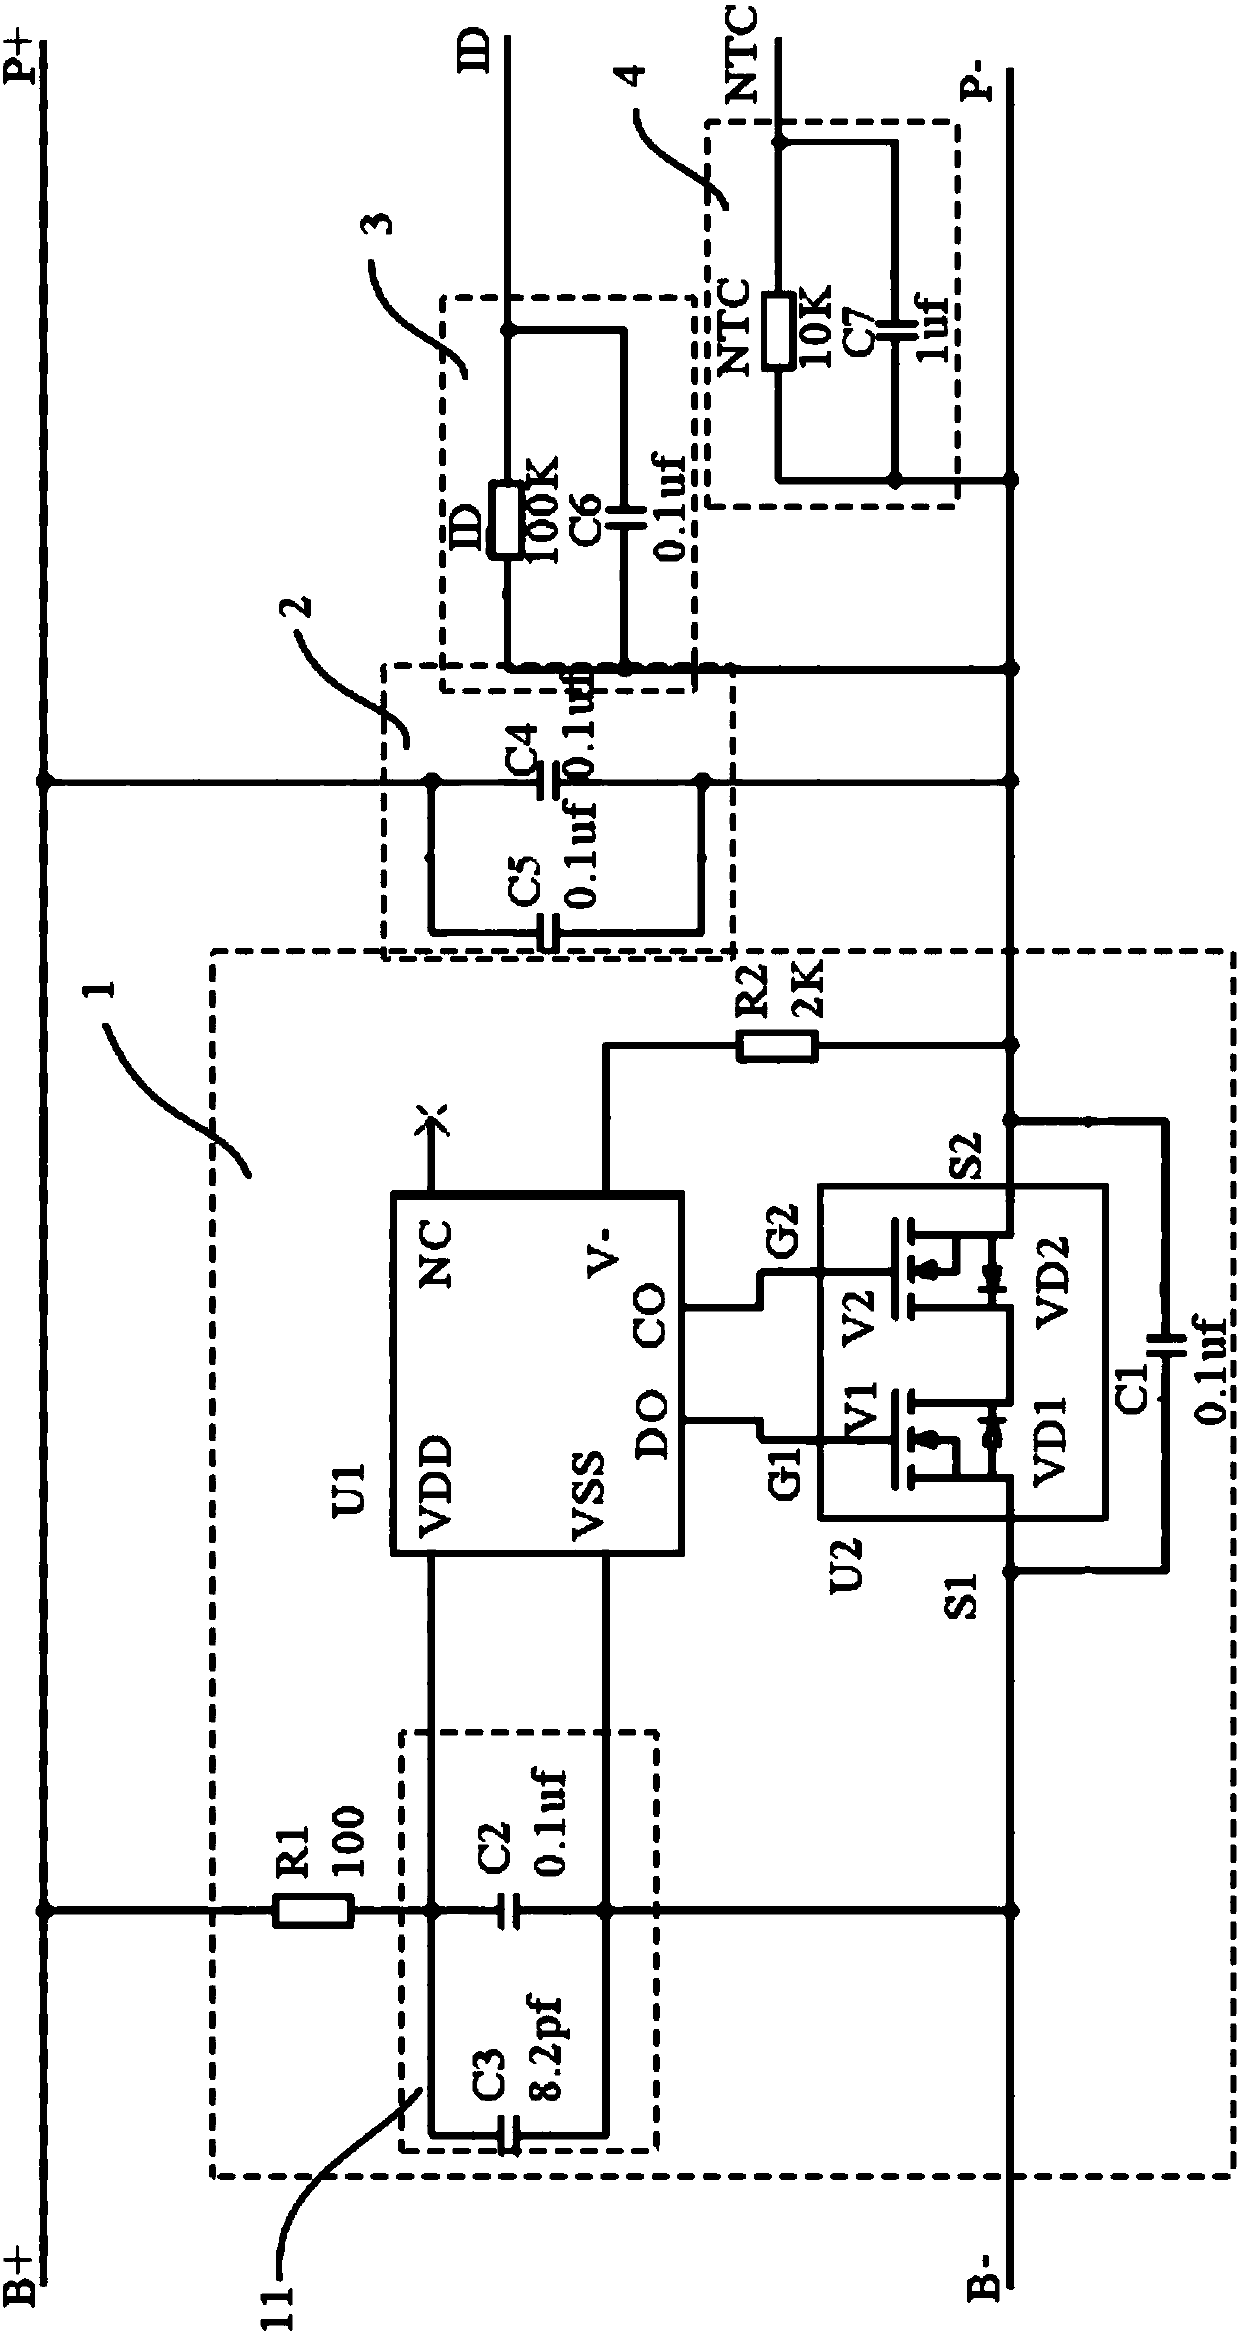 Lithium battery protection circuit applied to mobile phone